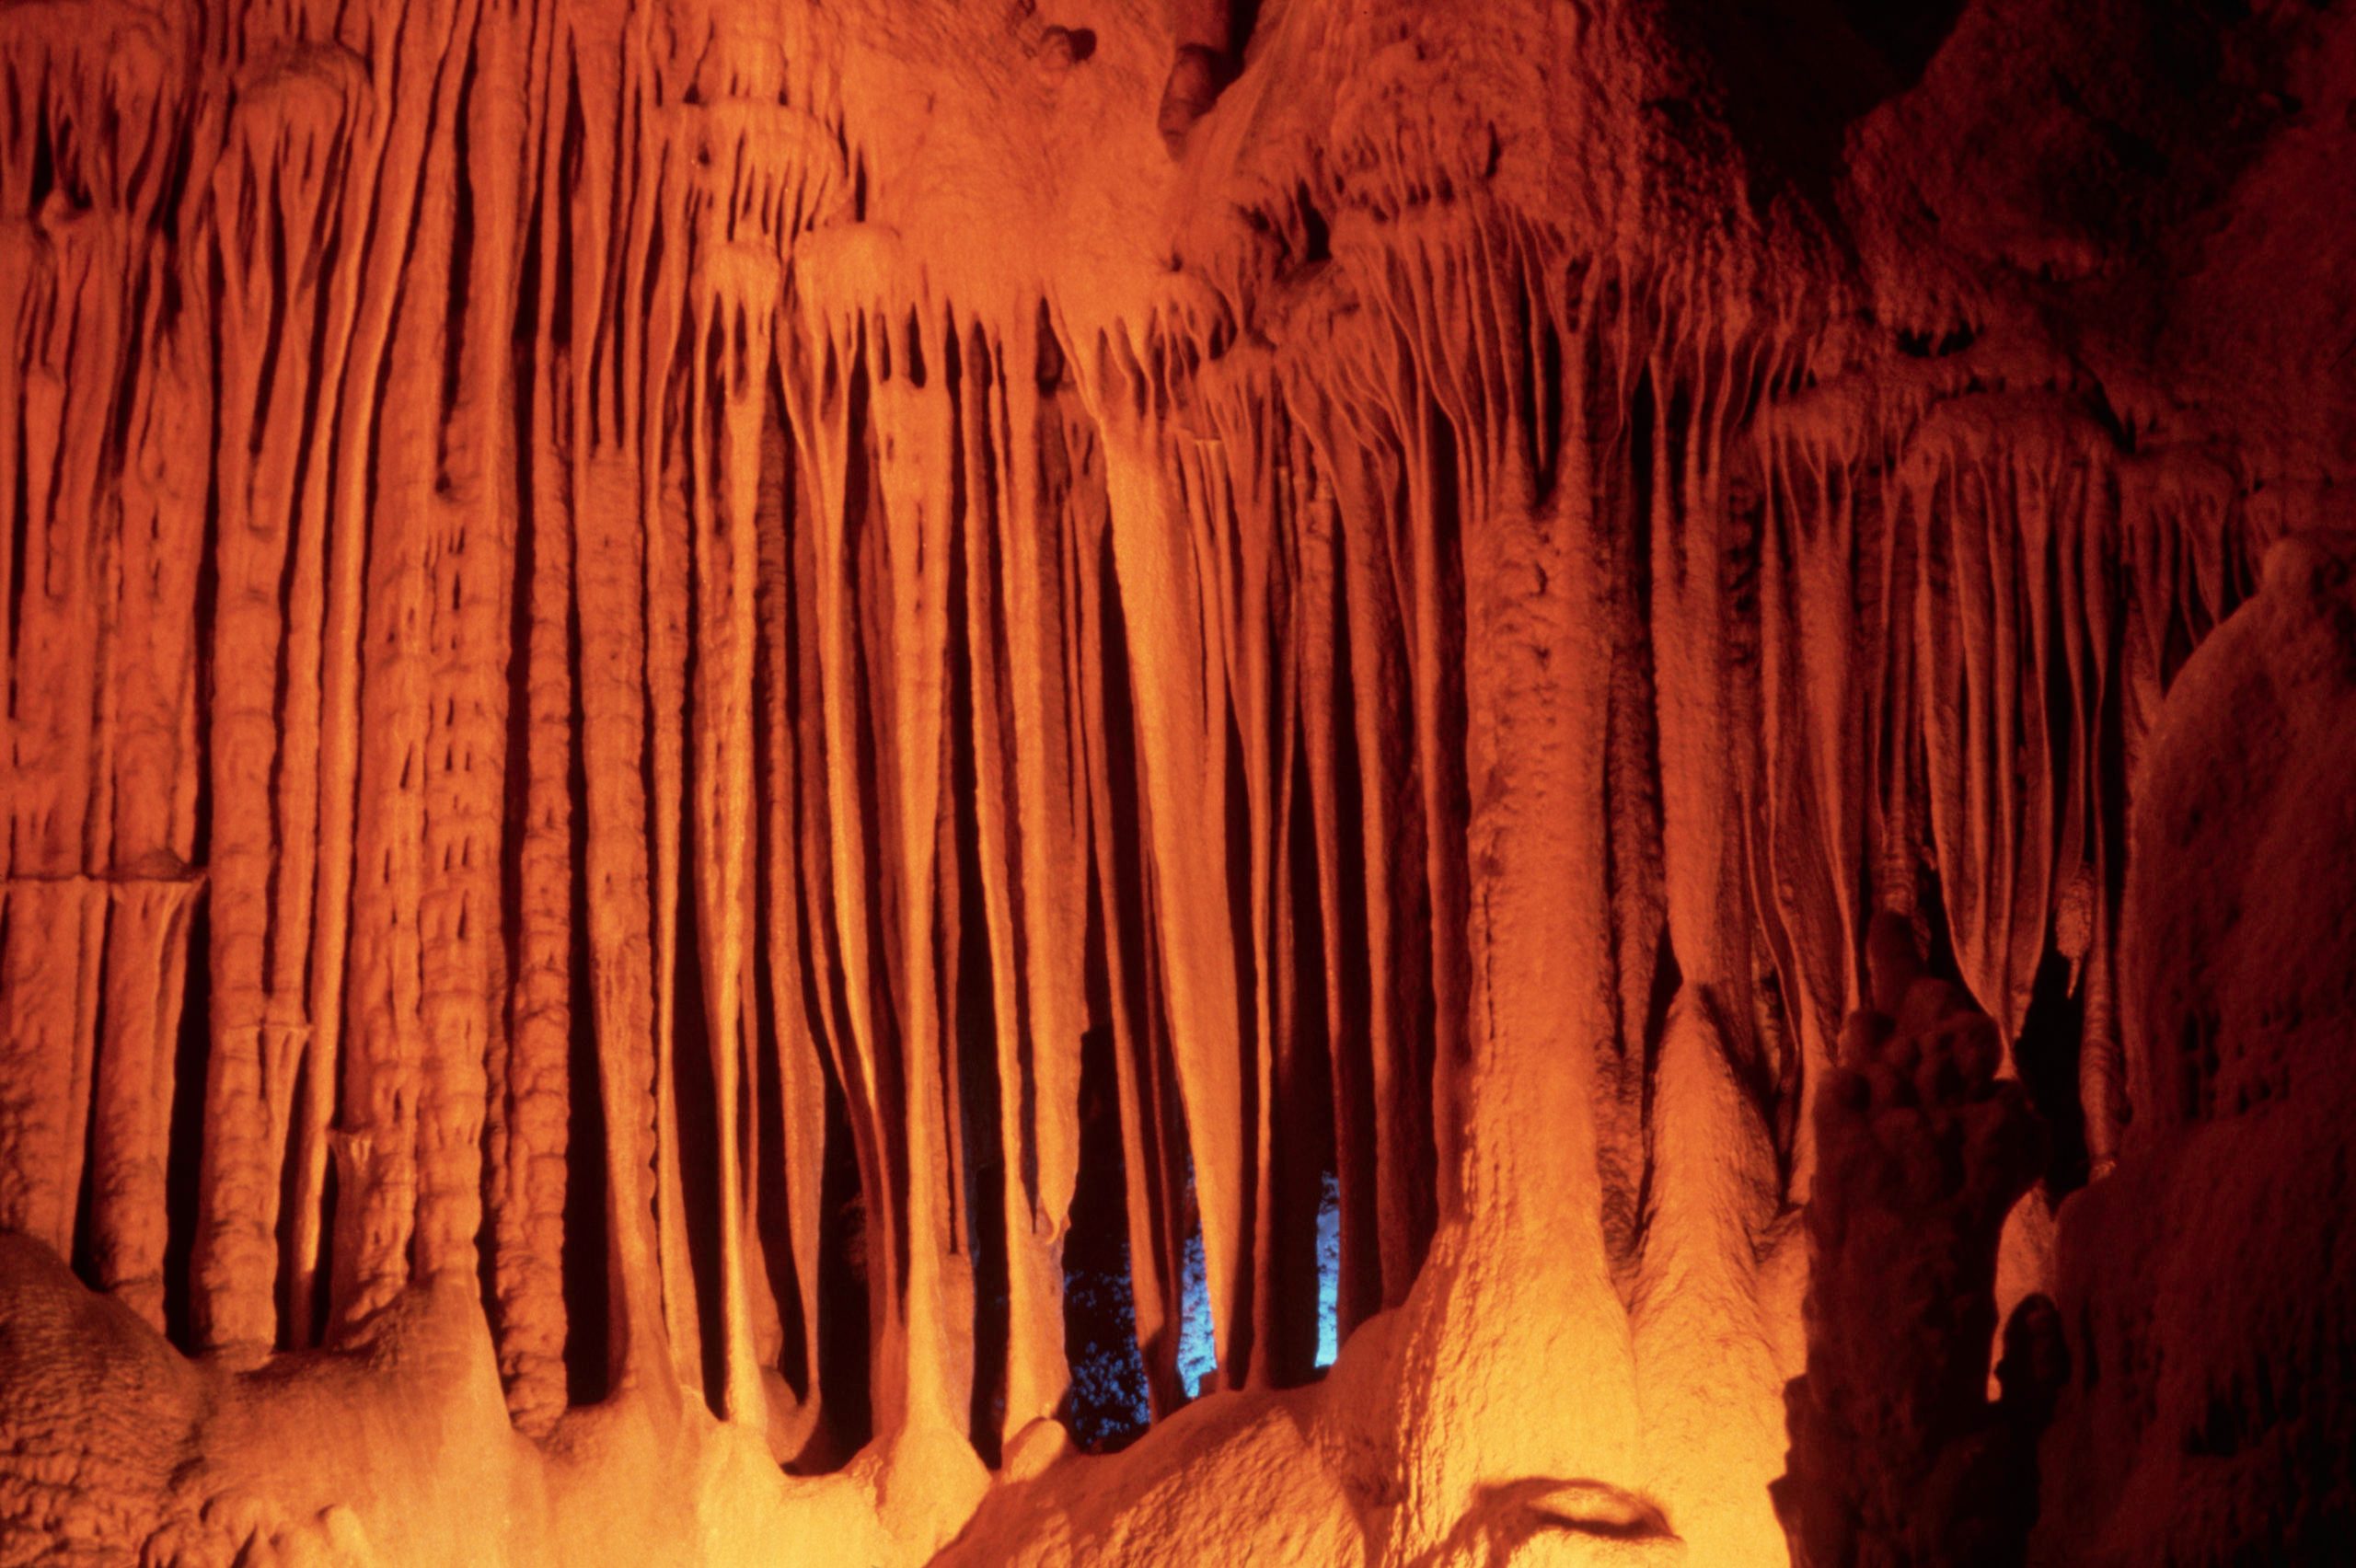 Pipe Organ Formation at Marengo Cave